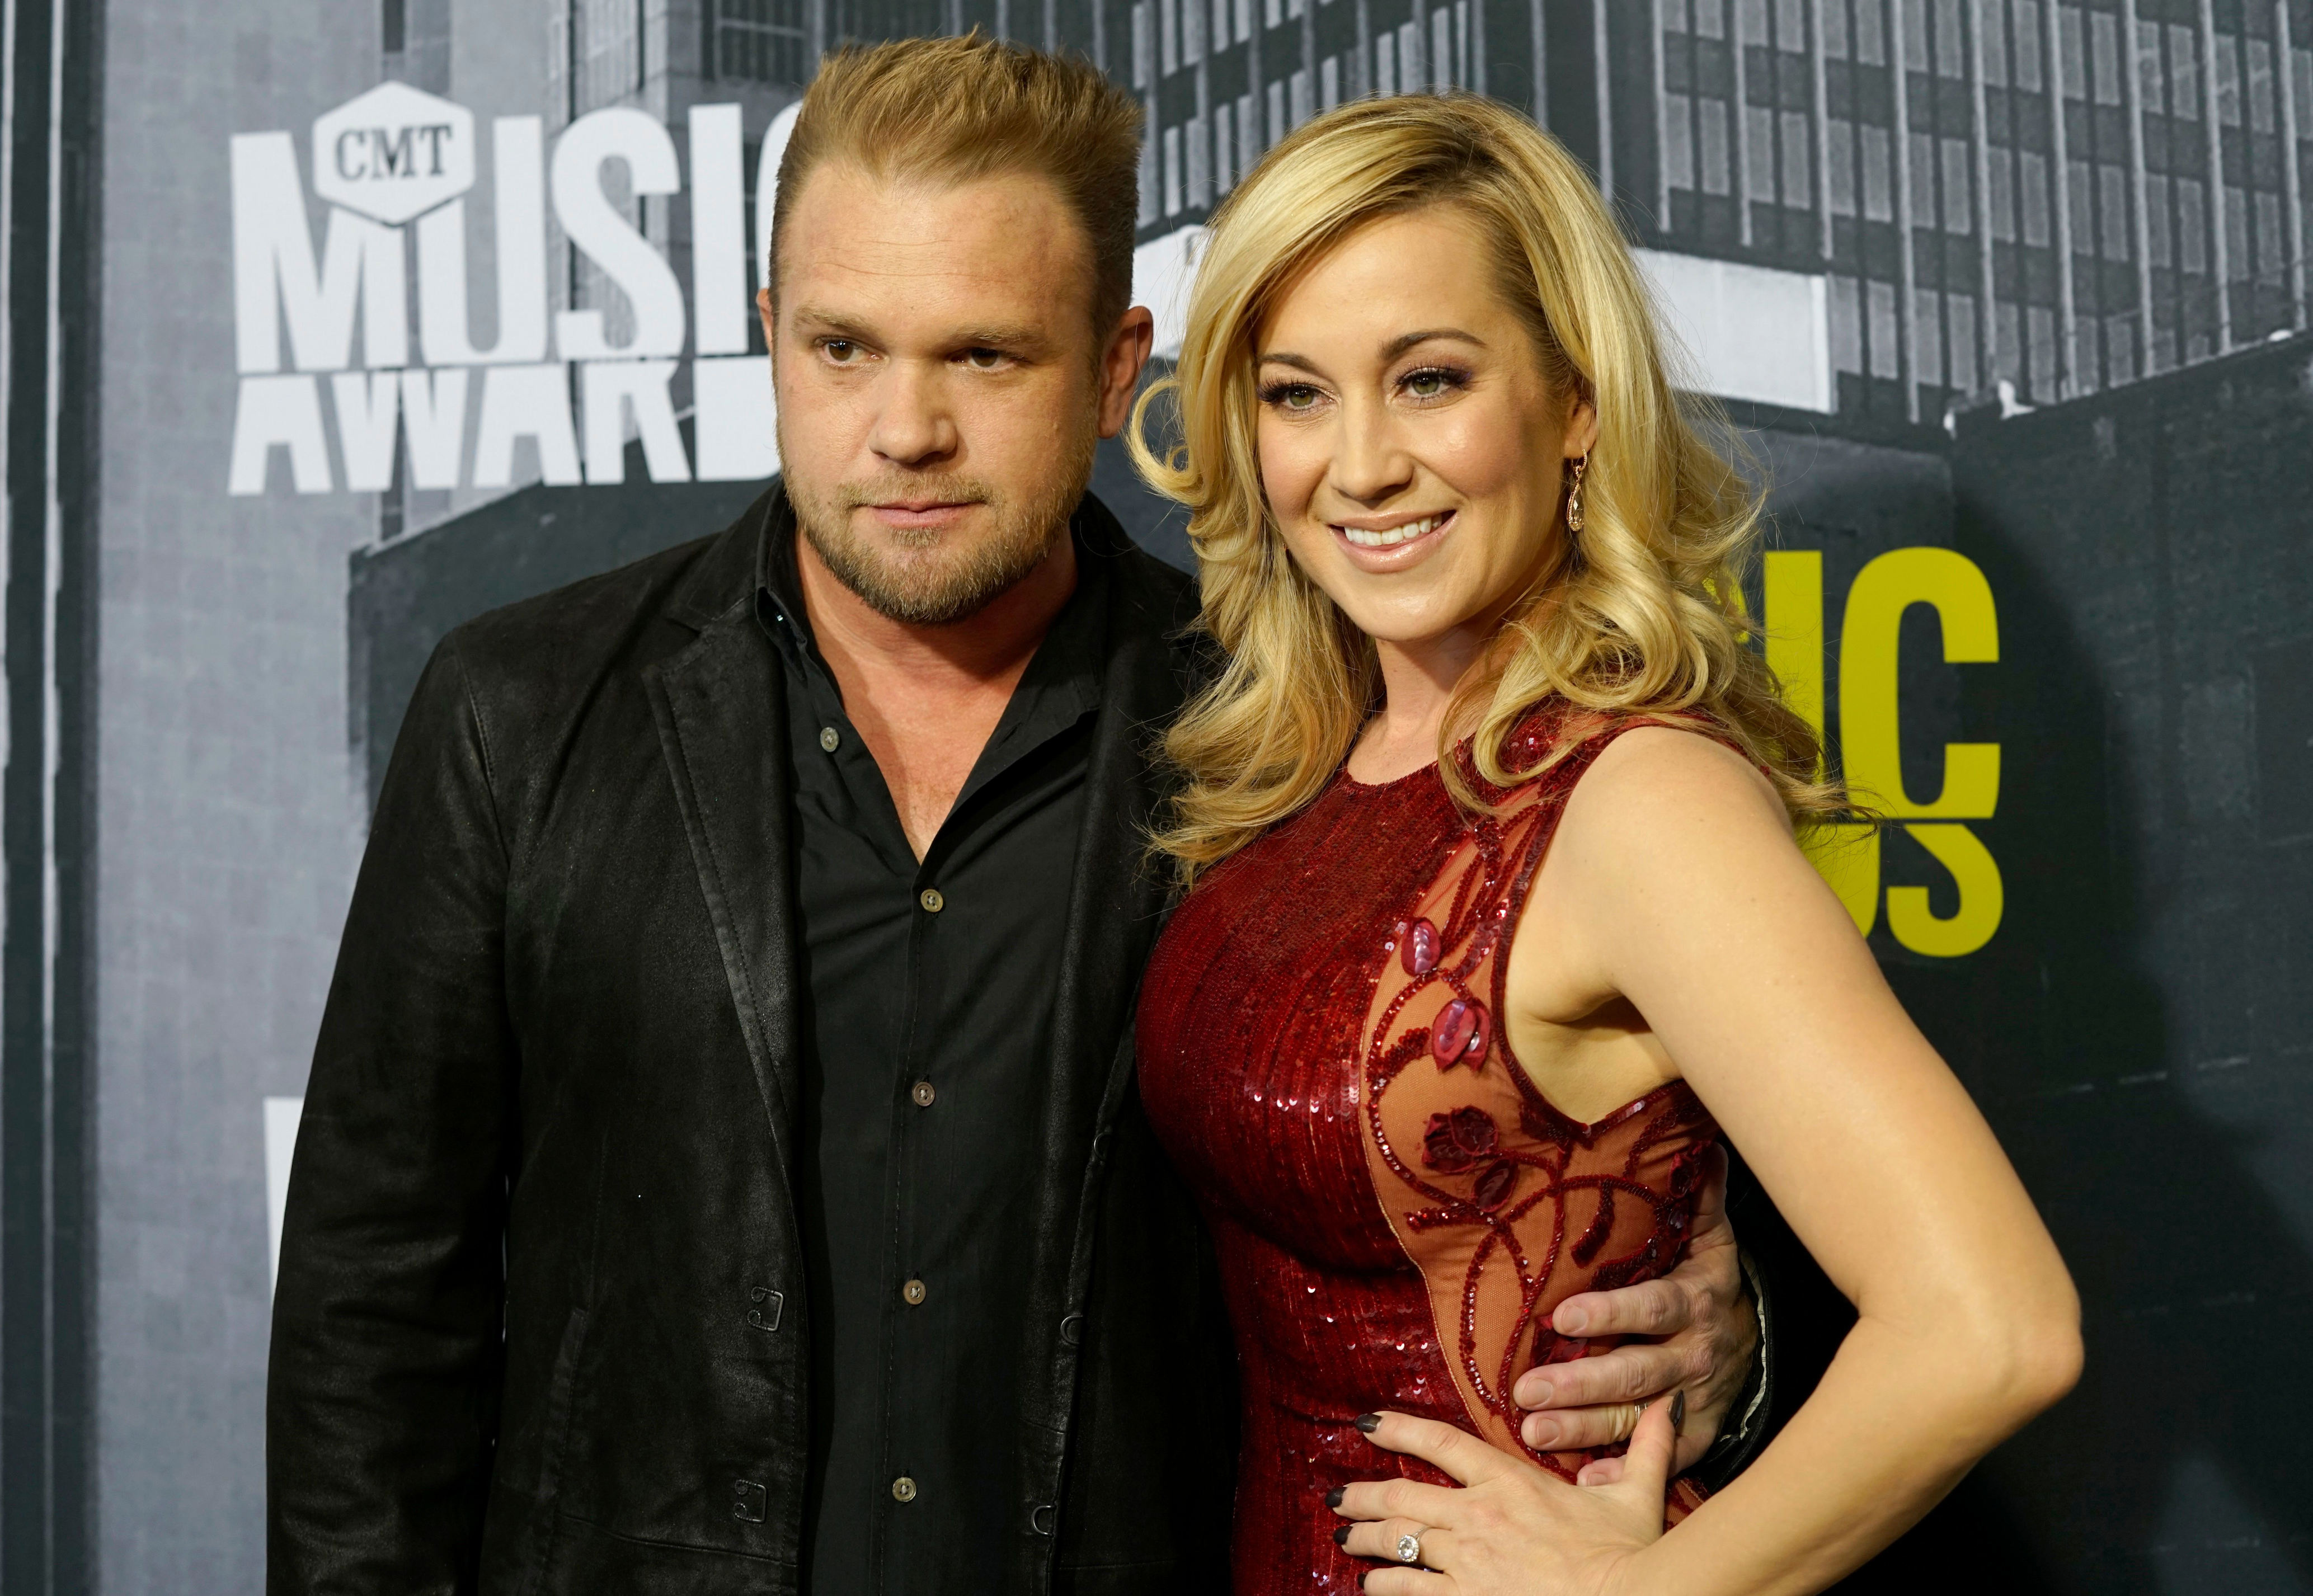 <p><span>Kellie Pickler -- the country music singer who came to fame on season 5 of "American Idol" in 2006 -- lost her husband of 12 years, country music songwriter and producer Kyle Jacobs, to suicide on Feb. 17, 2023. Kyle, who penned tunes for everyone from Garth Brooks, Tim McGraw and his wife to Kelly Clarkson, Wynonna Judd and Trace Adkins, was 49.</span></p><p>Six months after Kyle's death, <a href="https://www.wonderwall.com/entertainment/widowed-country-music-singer-kellie-pickler-breaks-her-silence-six-months-after-death-of-songwriter-husband-kyle-jacobs-776592.gallery">Kellie broke her silence</a> in a statement to <span><a href="https://people.com/kellie-pickler-breaks-silence-thanks-fans-after-husband-kyle-jacobs-death-suicide-exclusive-7644767">People</a></span> magazine, telling fans, "<span>One of the most beautiful lessons my husband taught me was in a moment of a crisis, if you don't know what to do, 'do nothing, just be still.' I have chosen to heed his advice.</span>"</p><p>She continued, "Thank you to my family, friends, and supporters, for the countless letters, calls, and messages that you have sent my way," Kellie continued. "It has truly touched my soul and it's helping me get through the darkest time in my life. As many of you have told me, you are all in my prayers."</p>